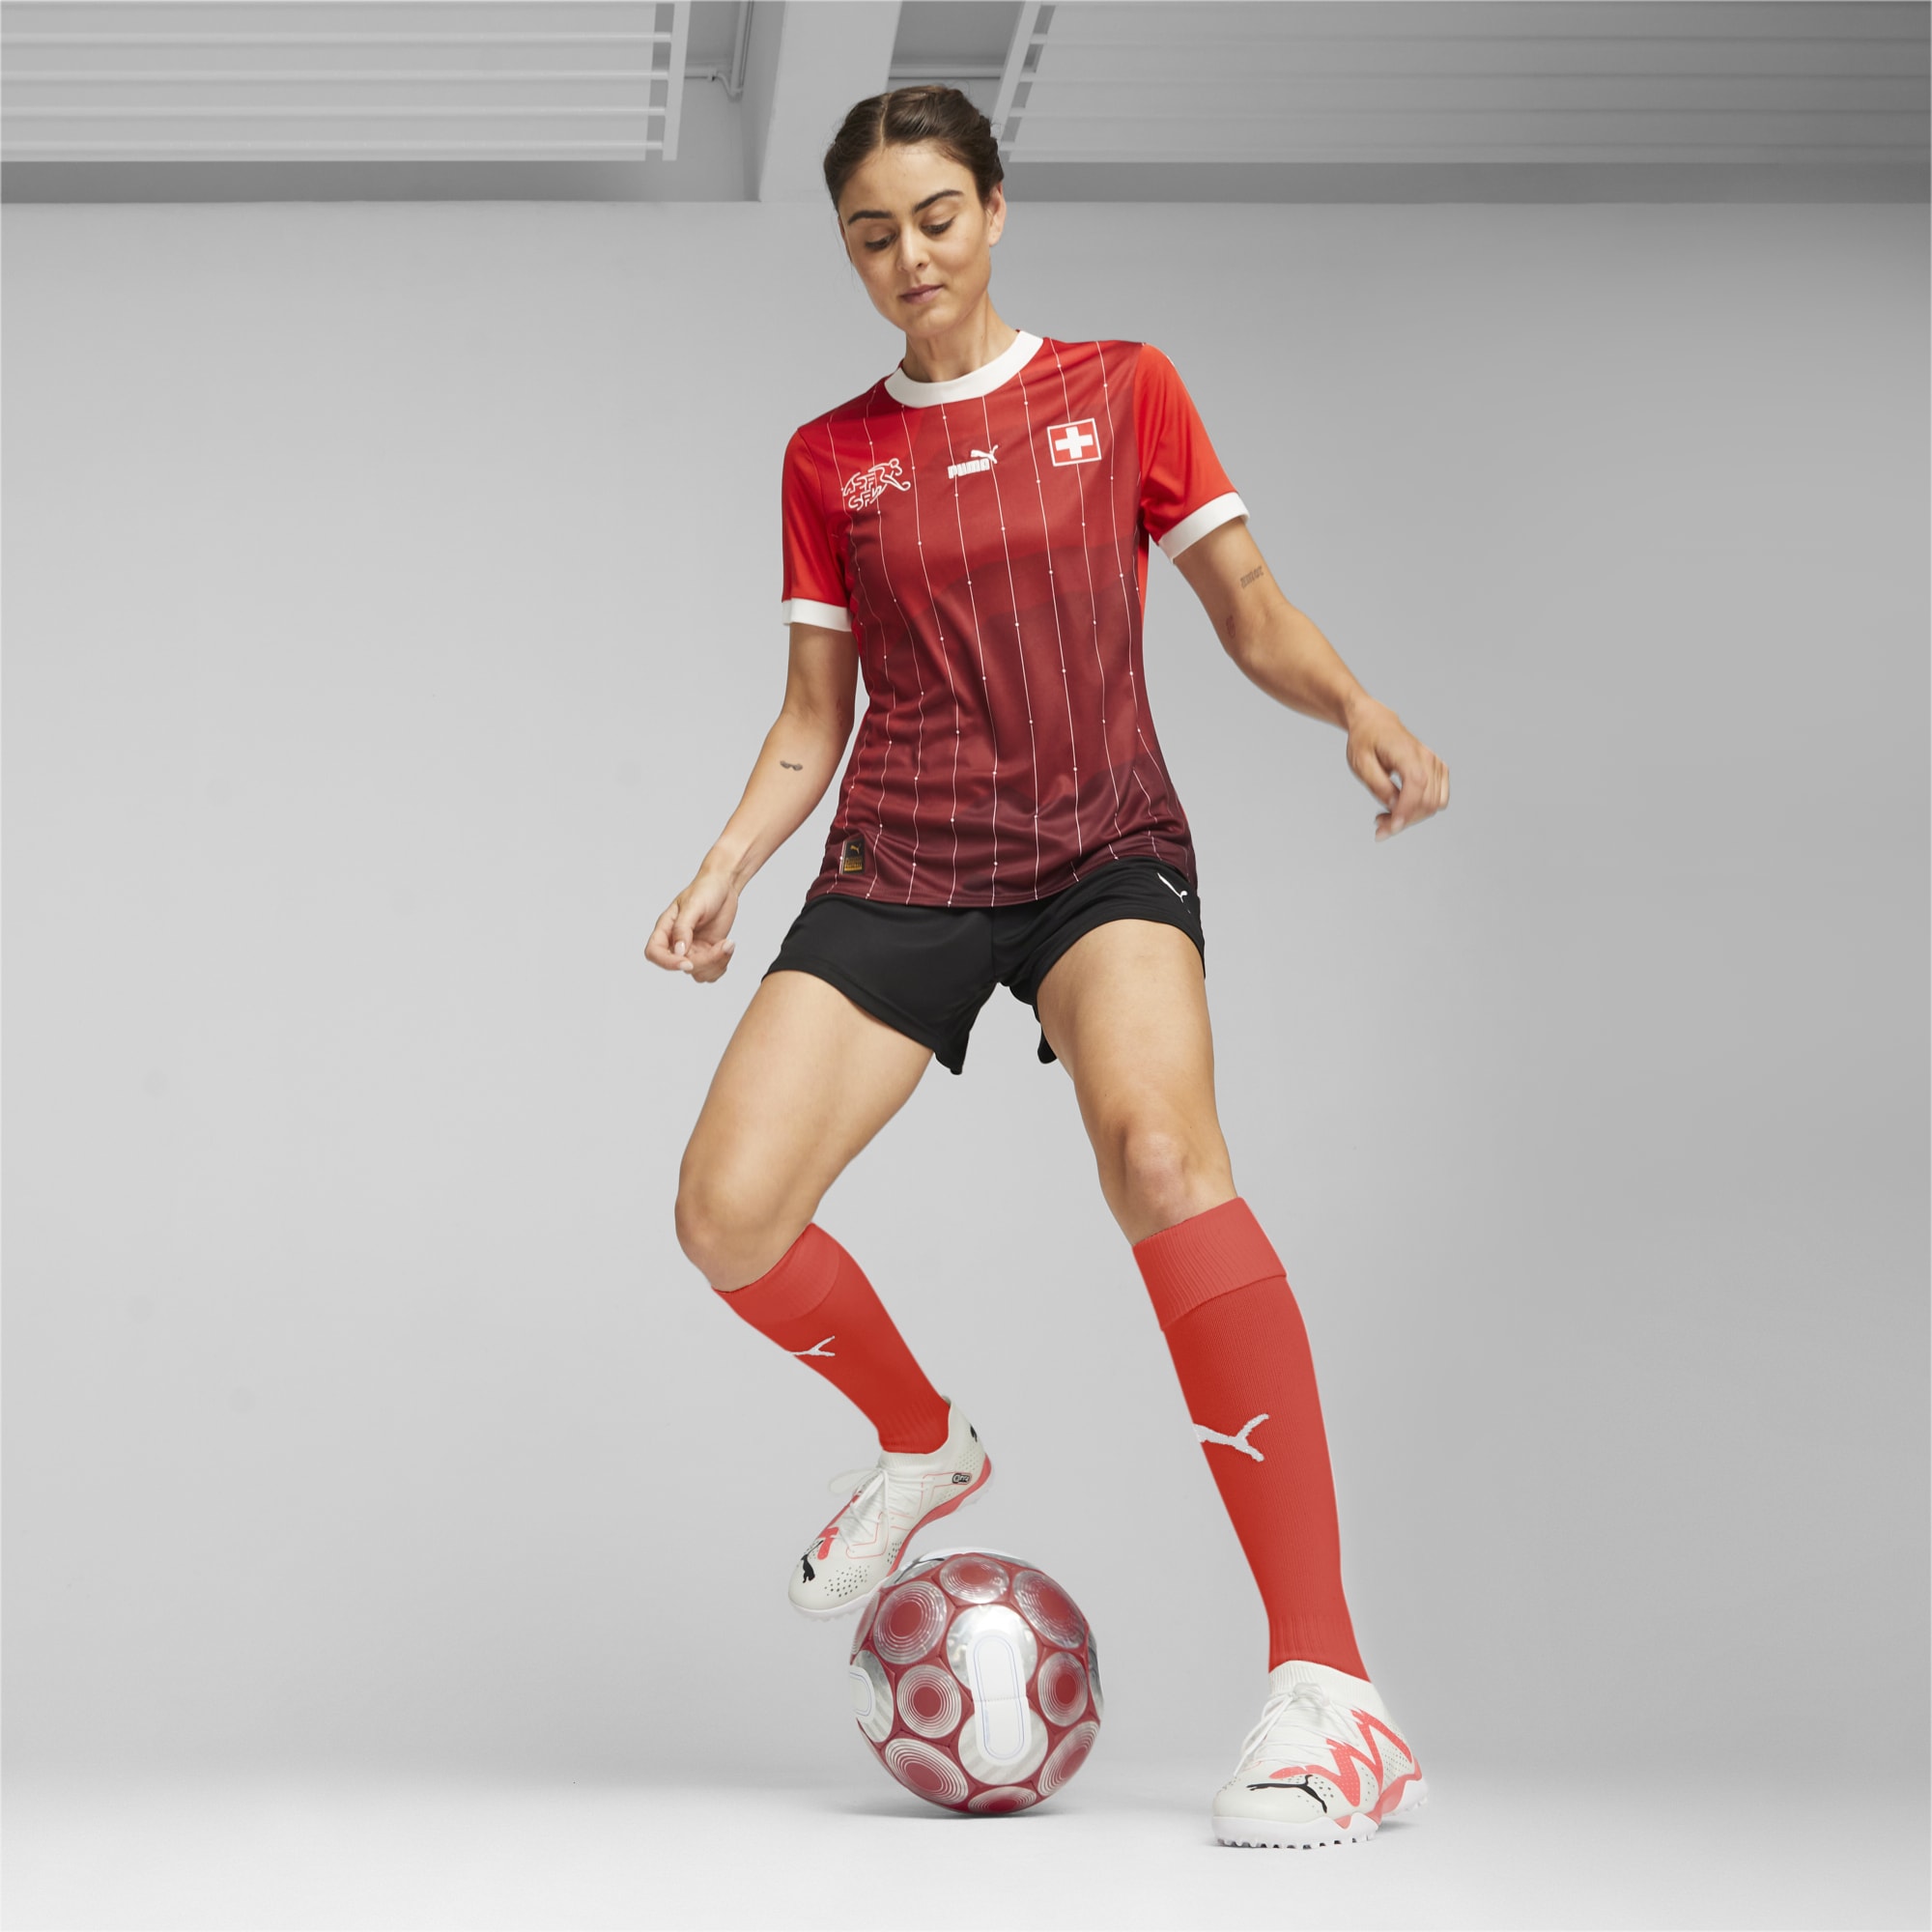 PUMA Switzerland 23/24 Women's World Cup Home Jersey, Red/White, Size XS, Clothing